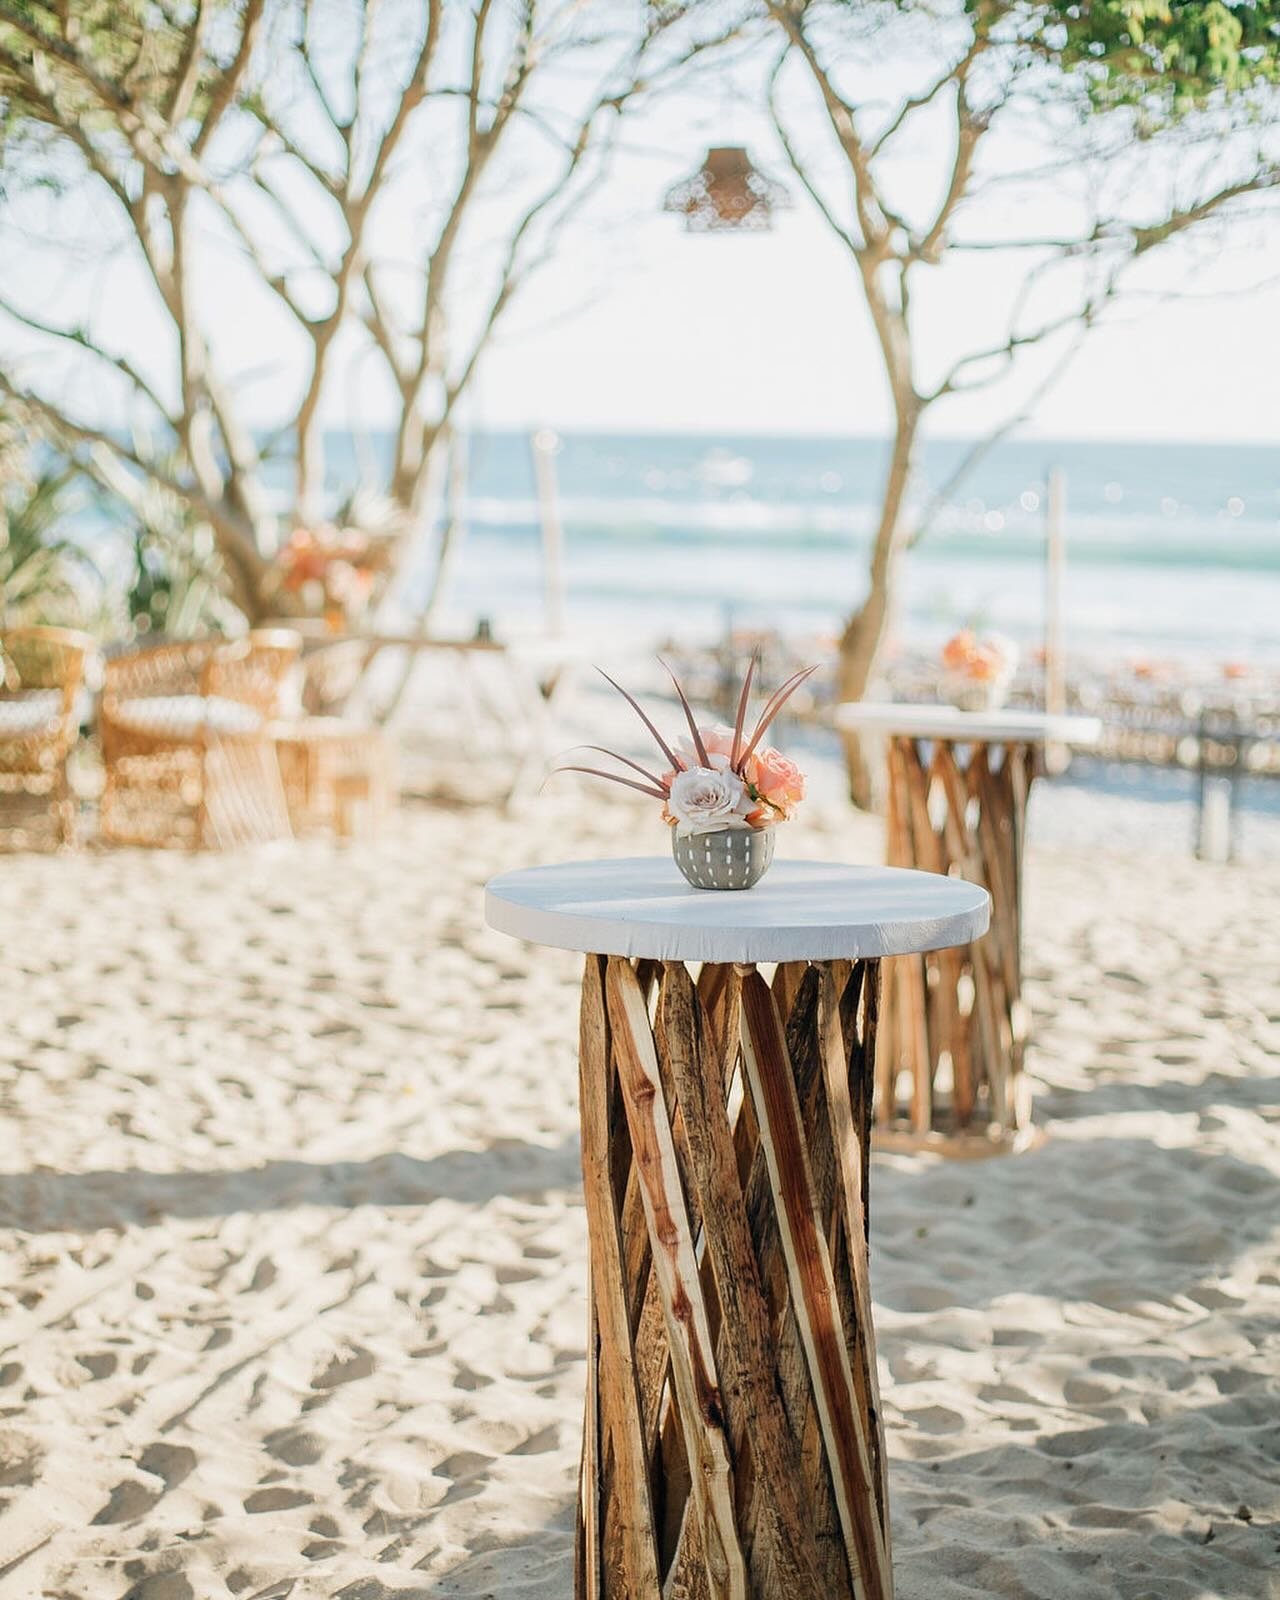 Cocktail hour on the beach means toes in the sand with a drink in your hand🍹🐚

Photographer | @trishaharrisonphotography 

#cocktailhour #beach #eventplanner #events #NYEparty #beachparty #ladylibertyevents #socialevents #socialparty #beachbirthday